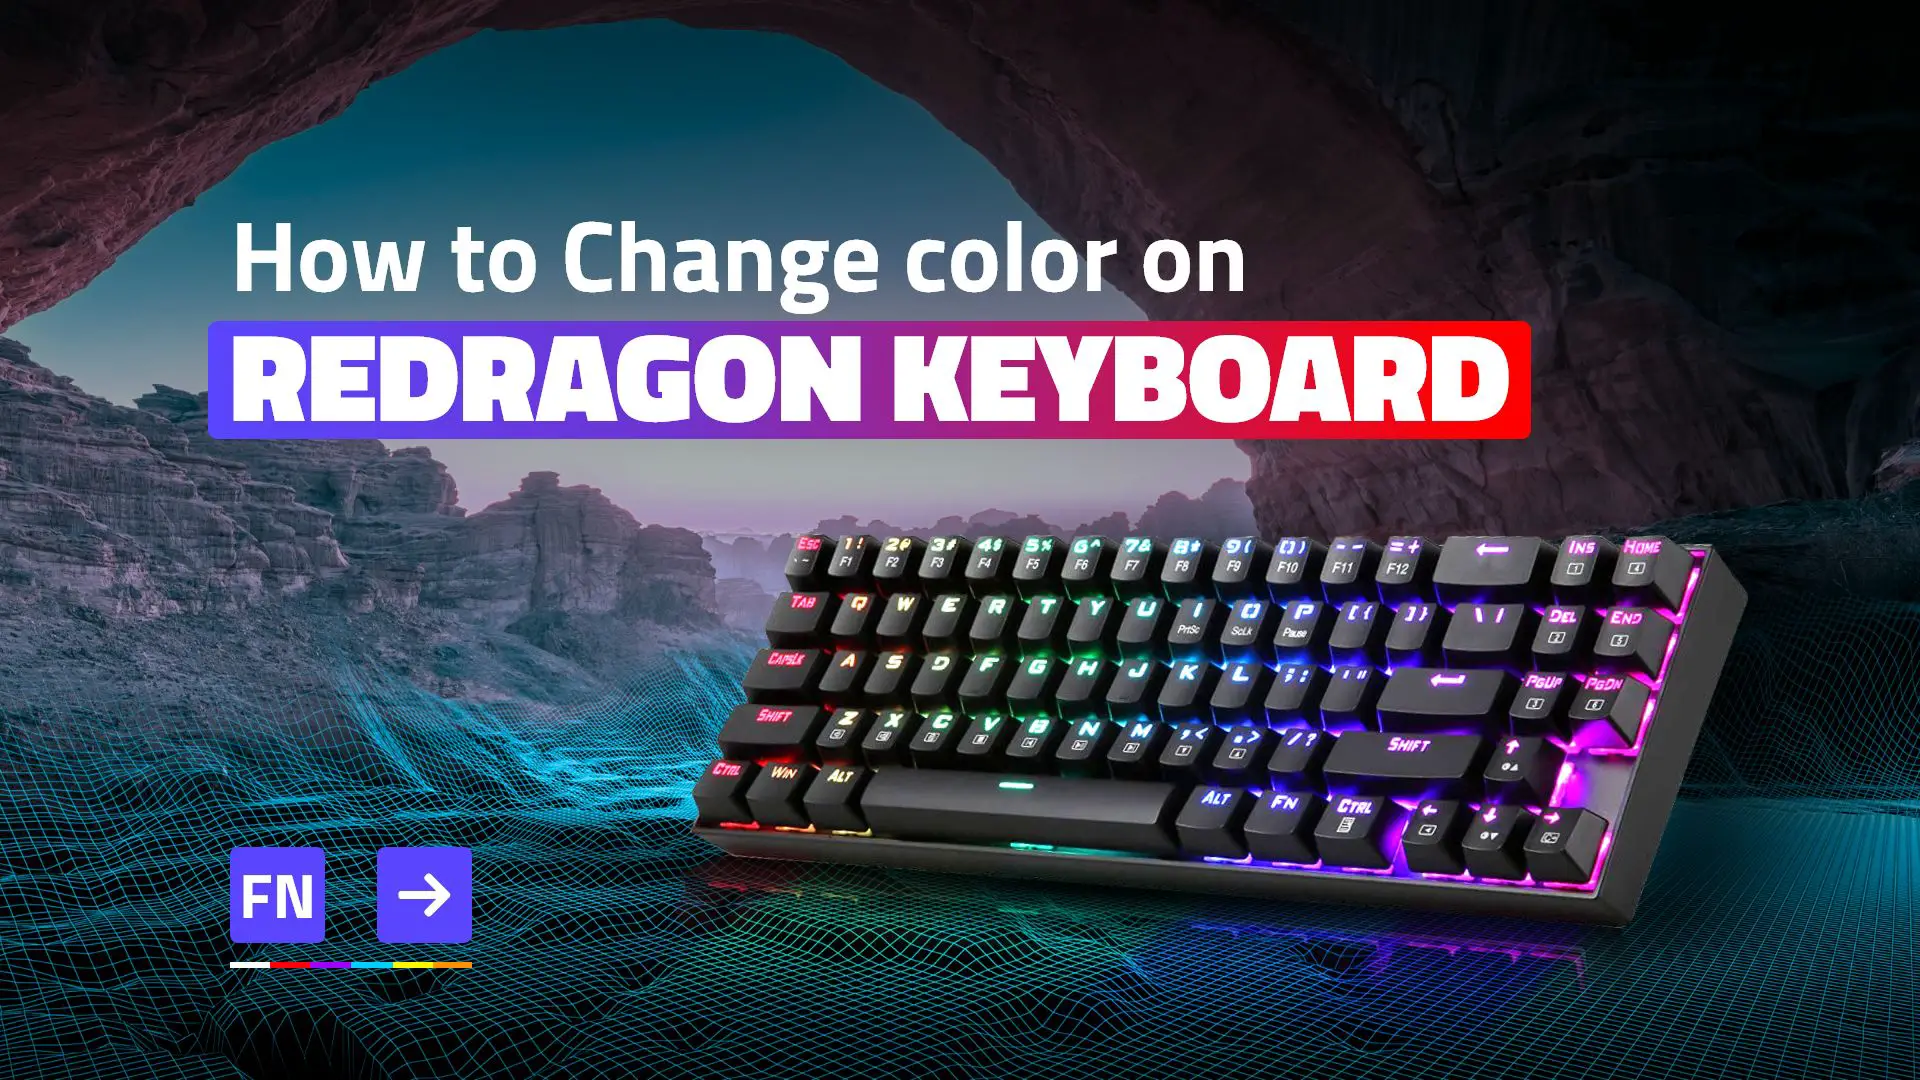 How to change color on REDRAGON keyboard